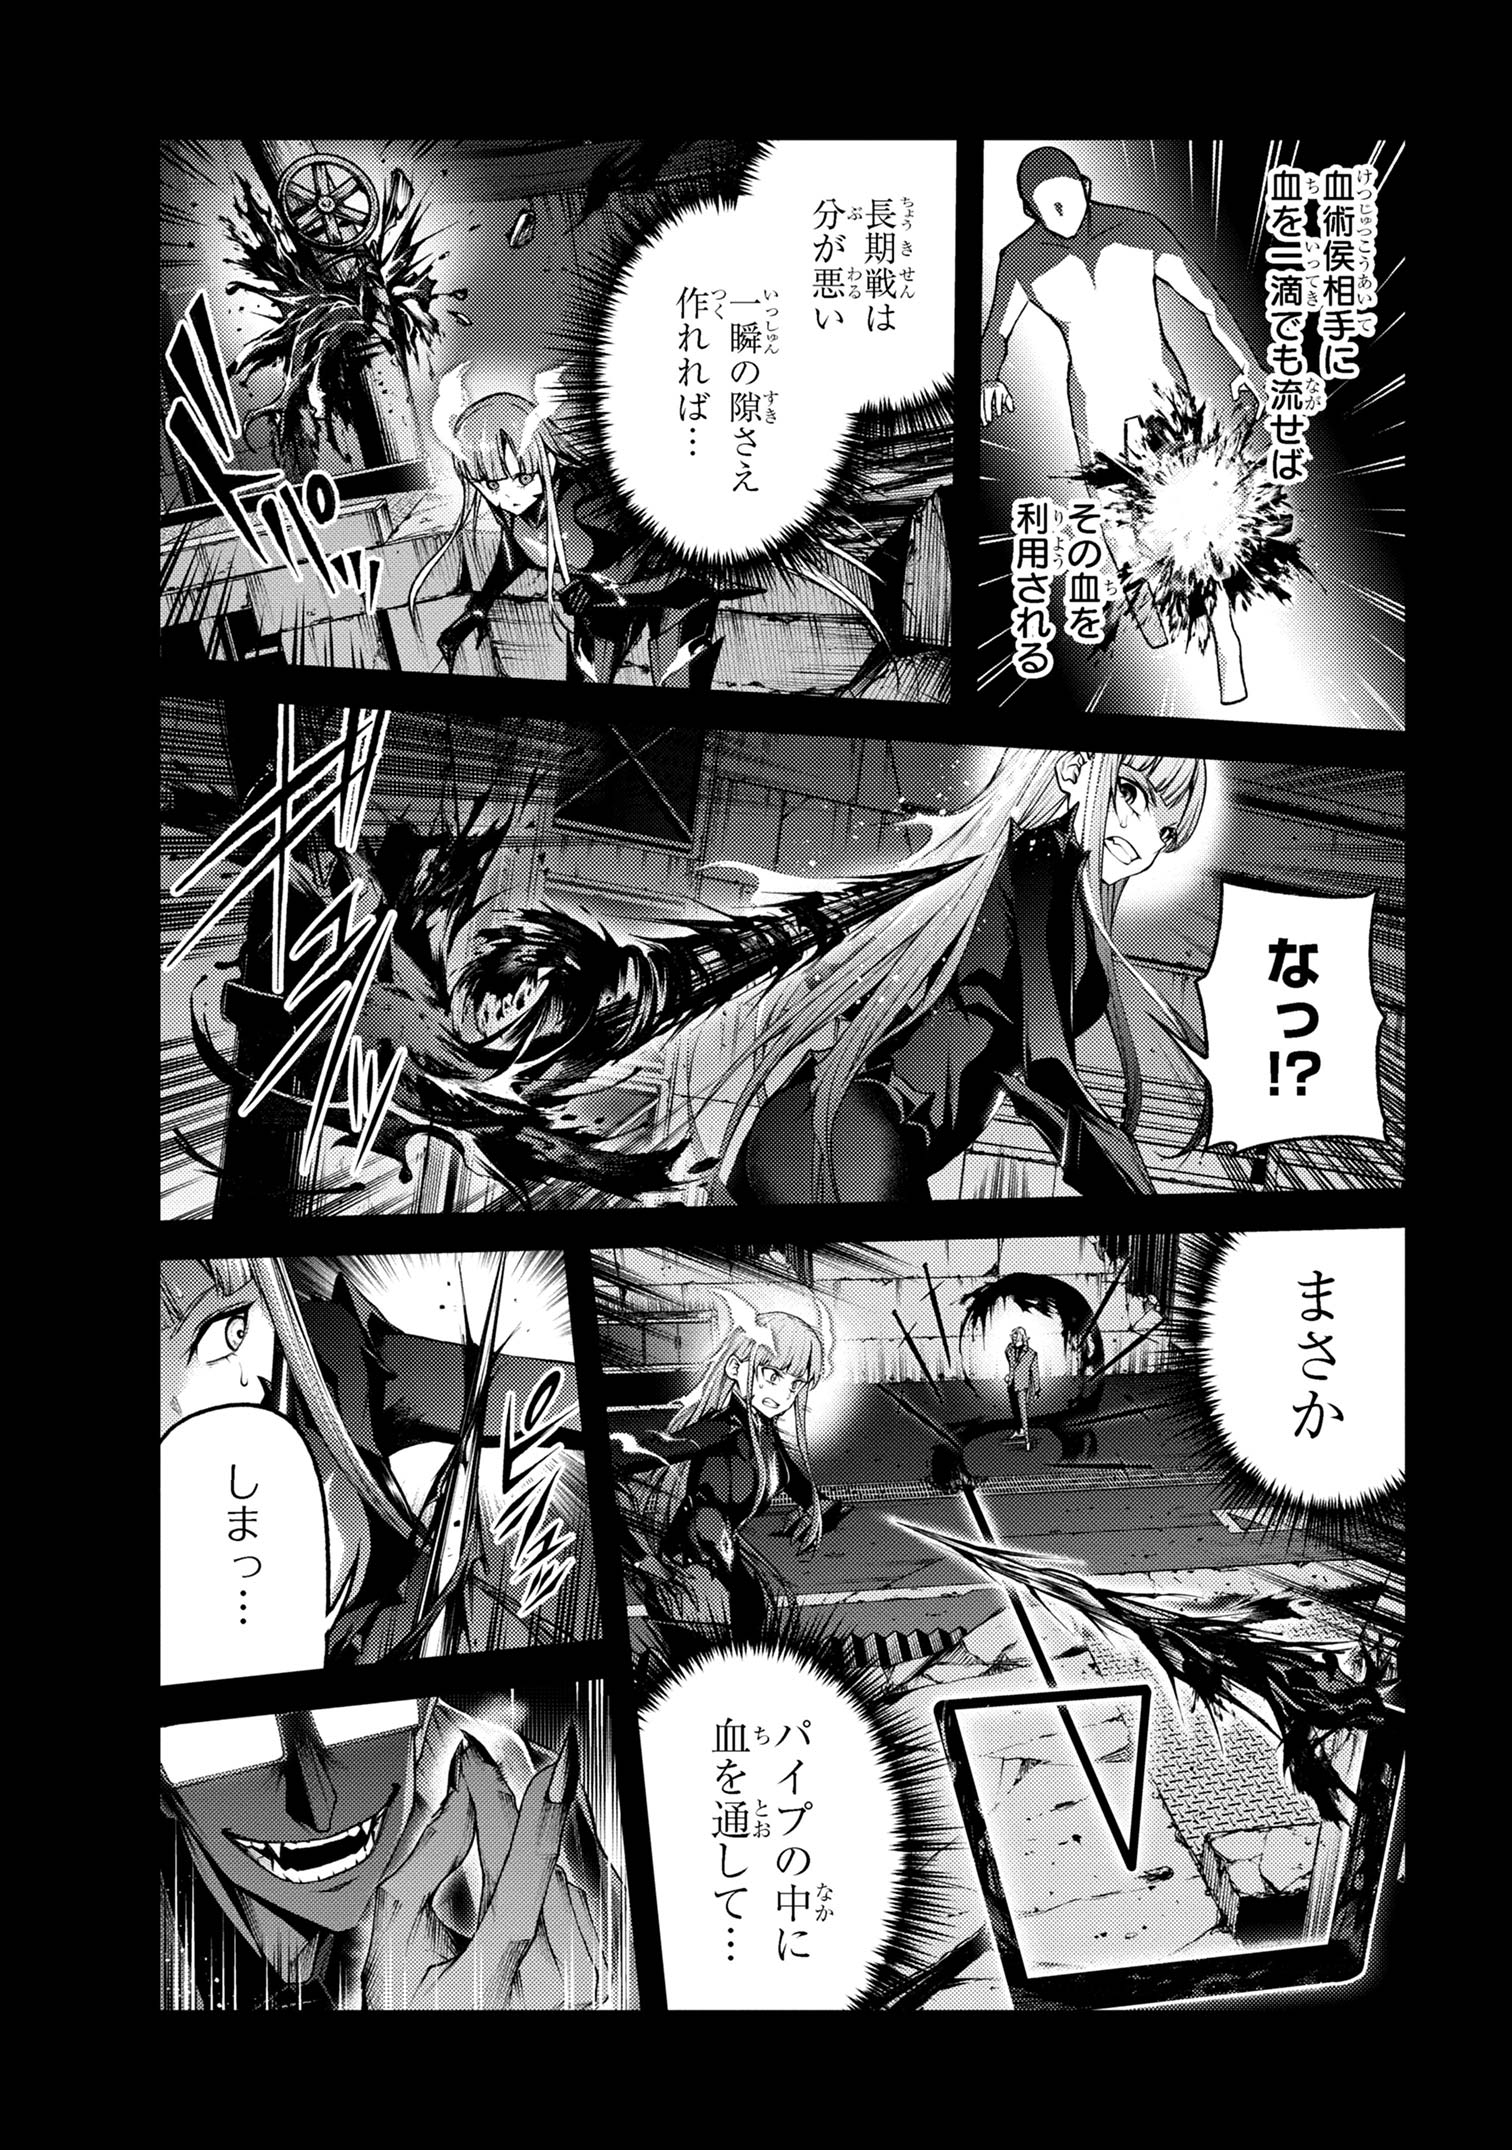 Maou 2099 - Chapter 8.2 - Page 3